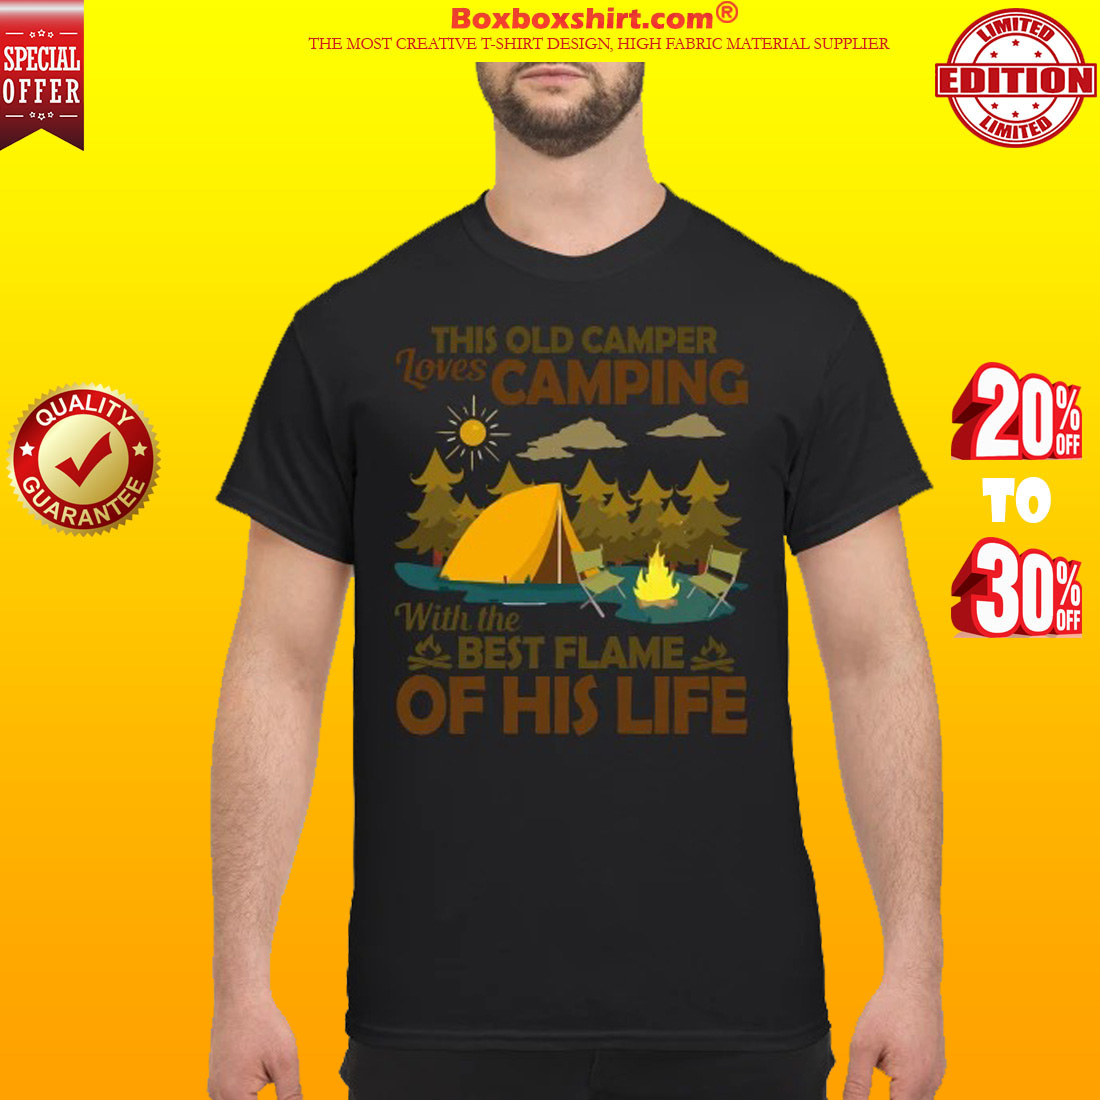 This old camper love camping with the best flame of his life shirt